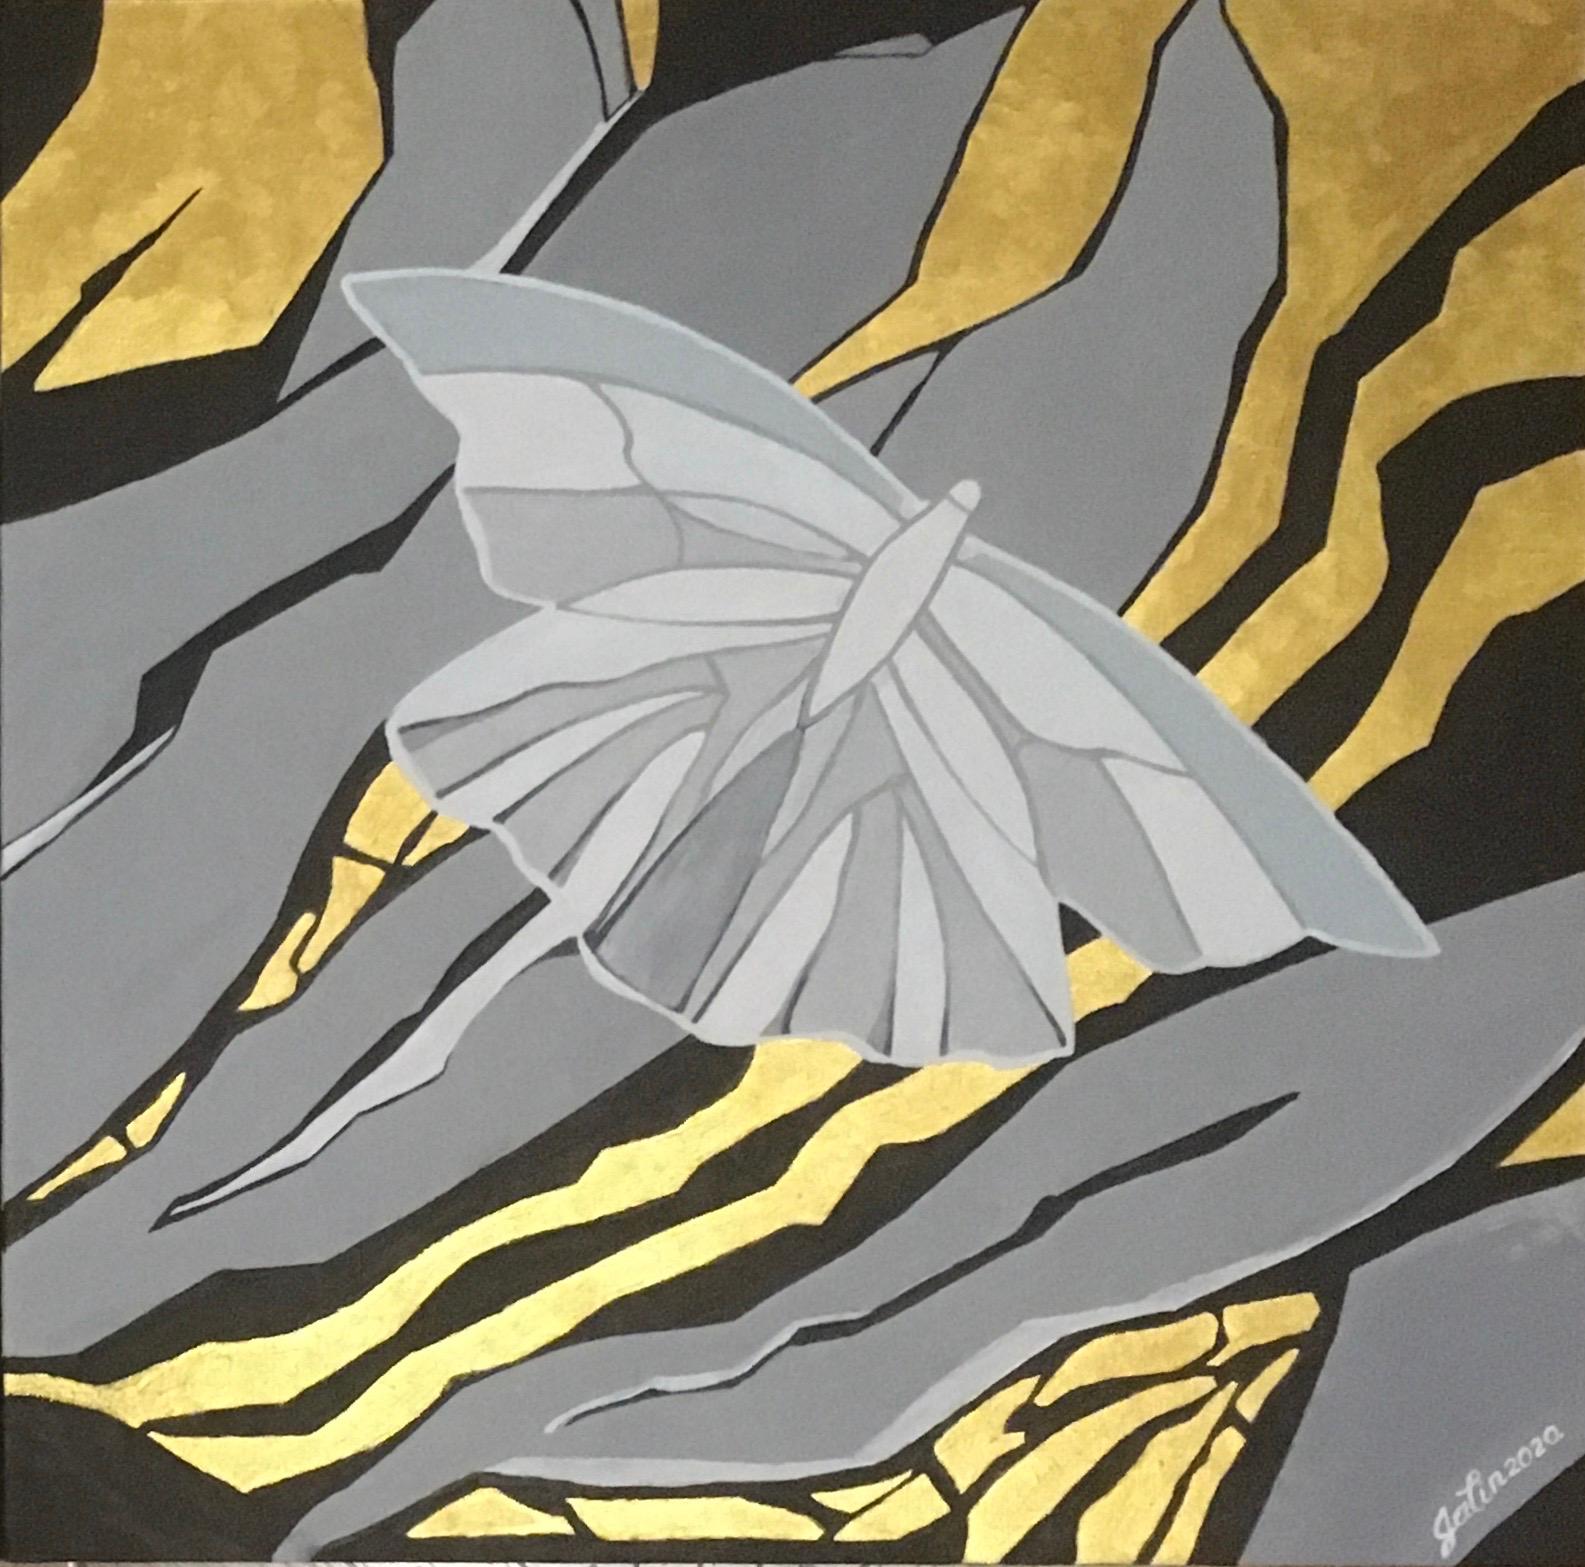 Moths-abstraction art, made in black, gold, grey, white - Painting by Galin R